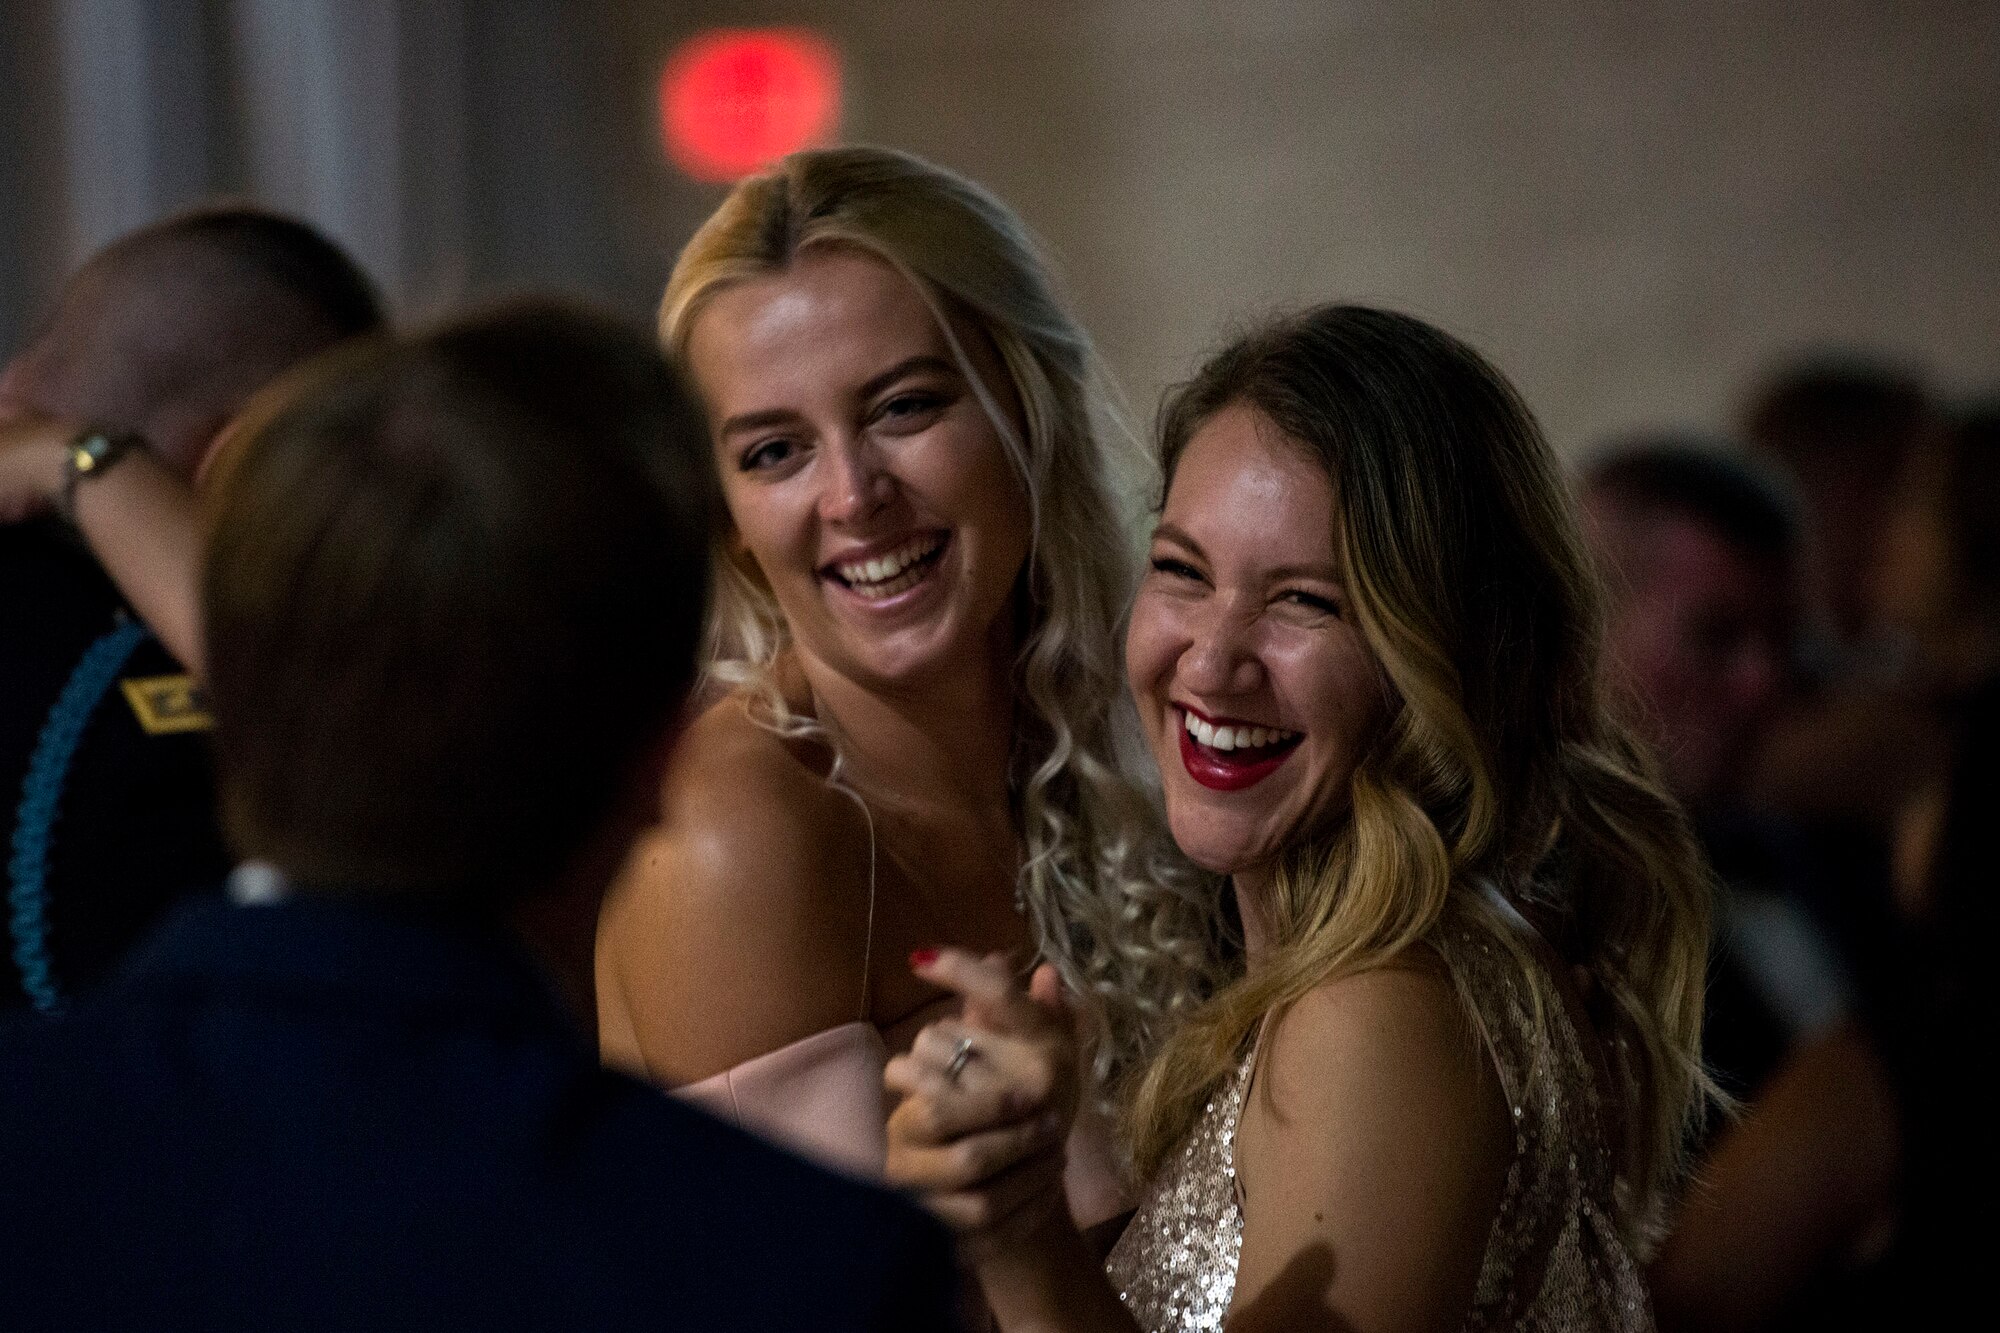 Attendees share a laugh during the Air Force Ball, Sept. 15, 2018, at the James H. Rainwater Conference Center in Valdosta, Ga. Moody’s Air Force Ball was not only a celebration of the Air Force’s 71st Birthday but a way to foster esprit de corps and pride among Airmen through a shared history of exceptional service. (U.S. Air Force photo by Airman 1st Class Erick Requadt)